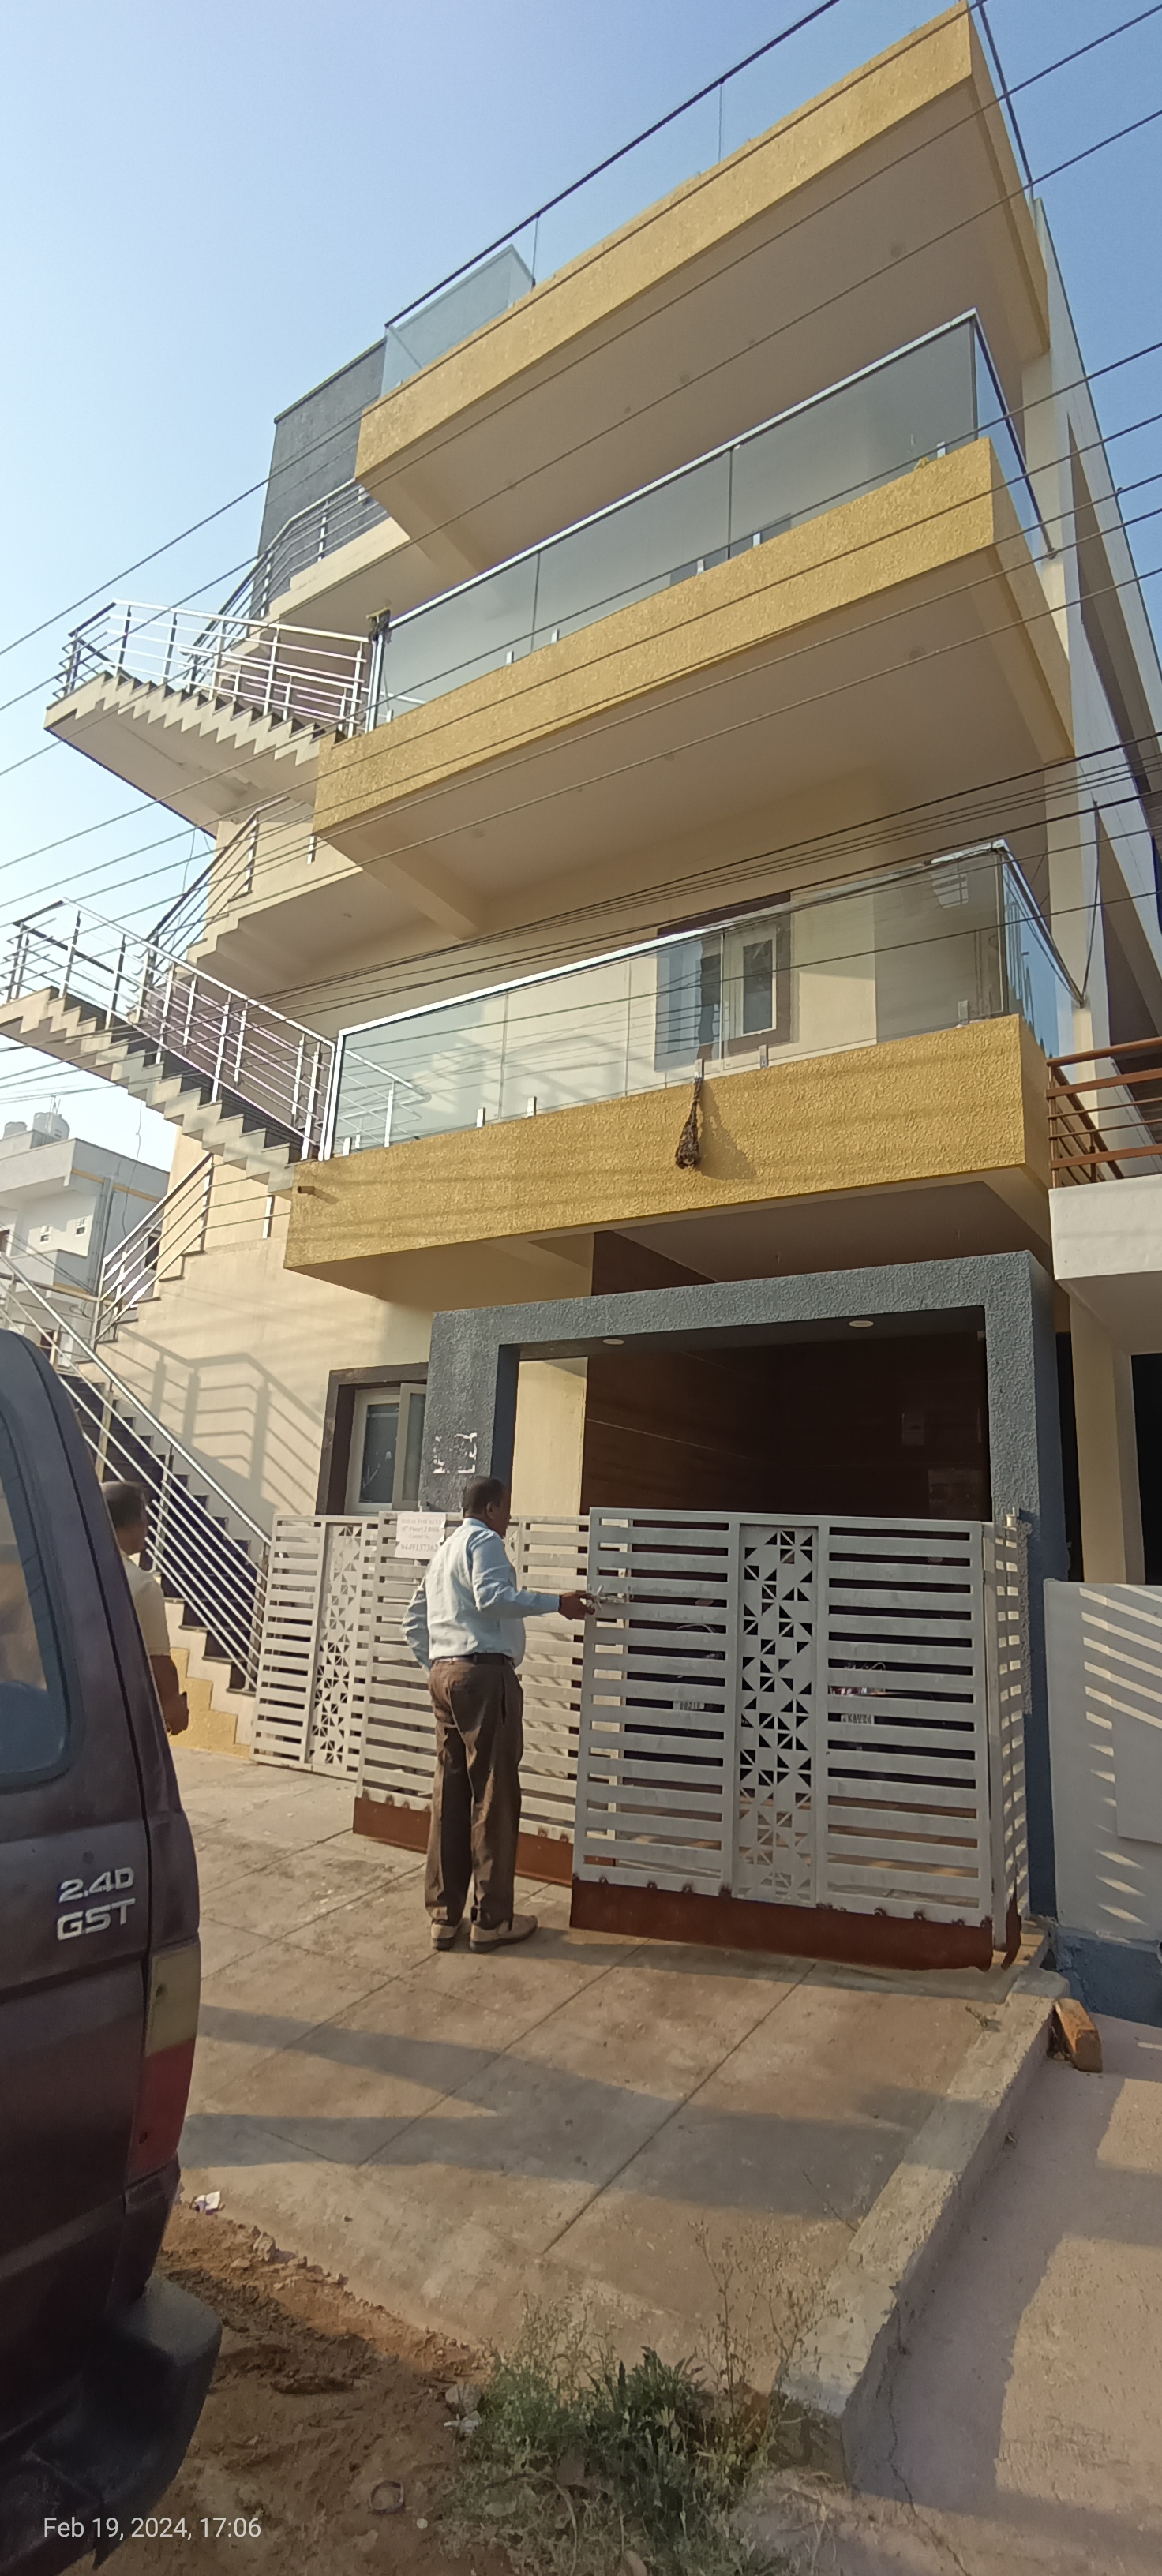 2 BHK Duplex Apartment for Rent Only in J.P. Nagar